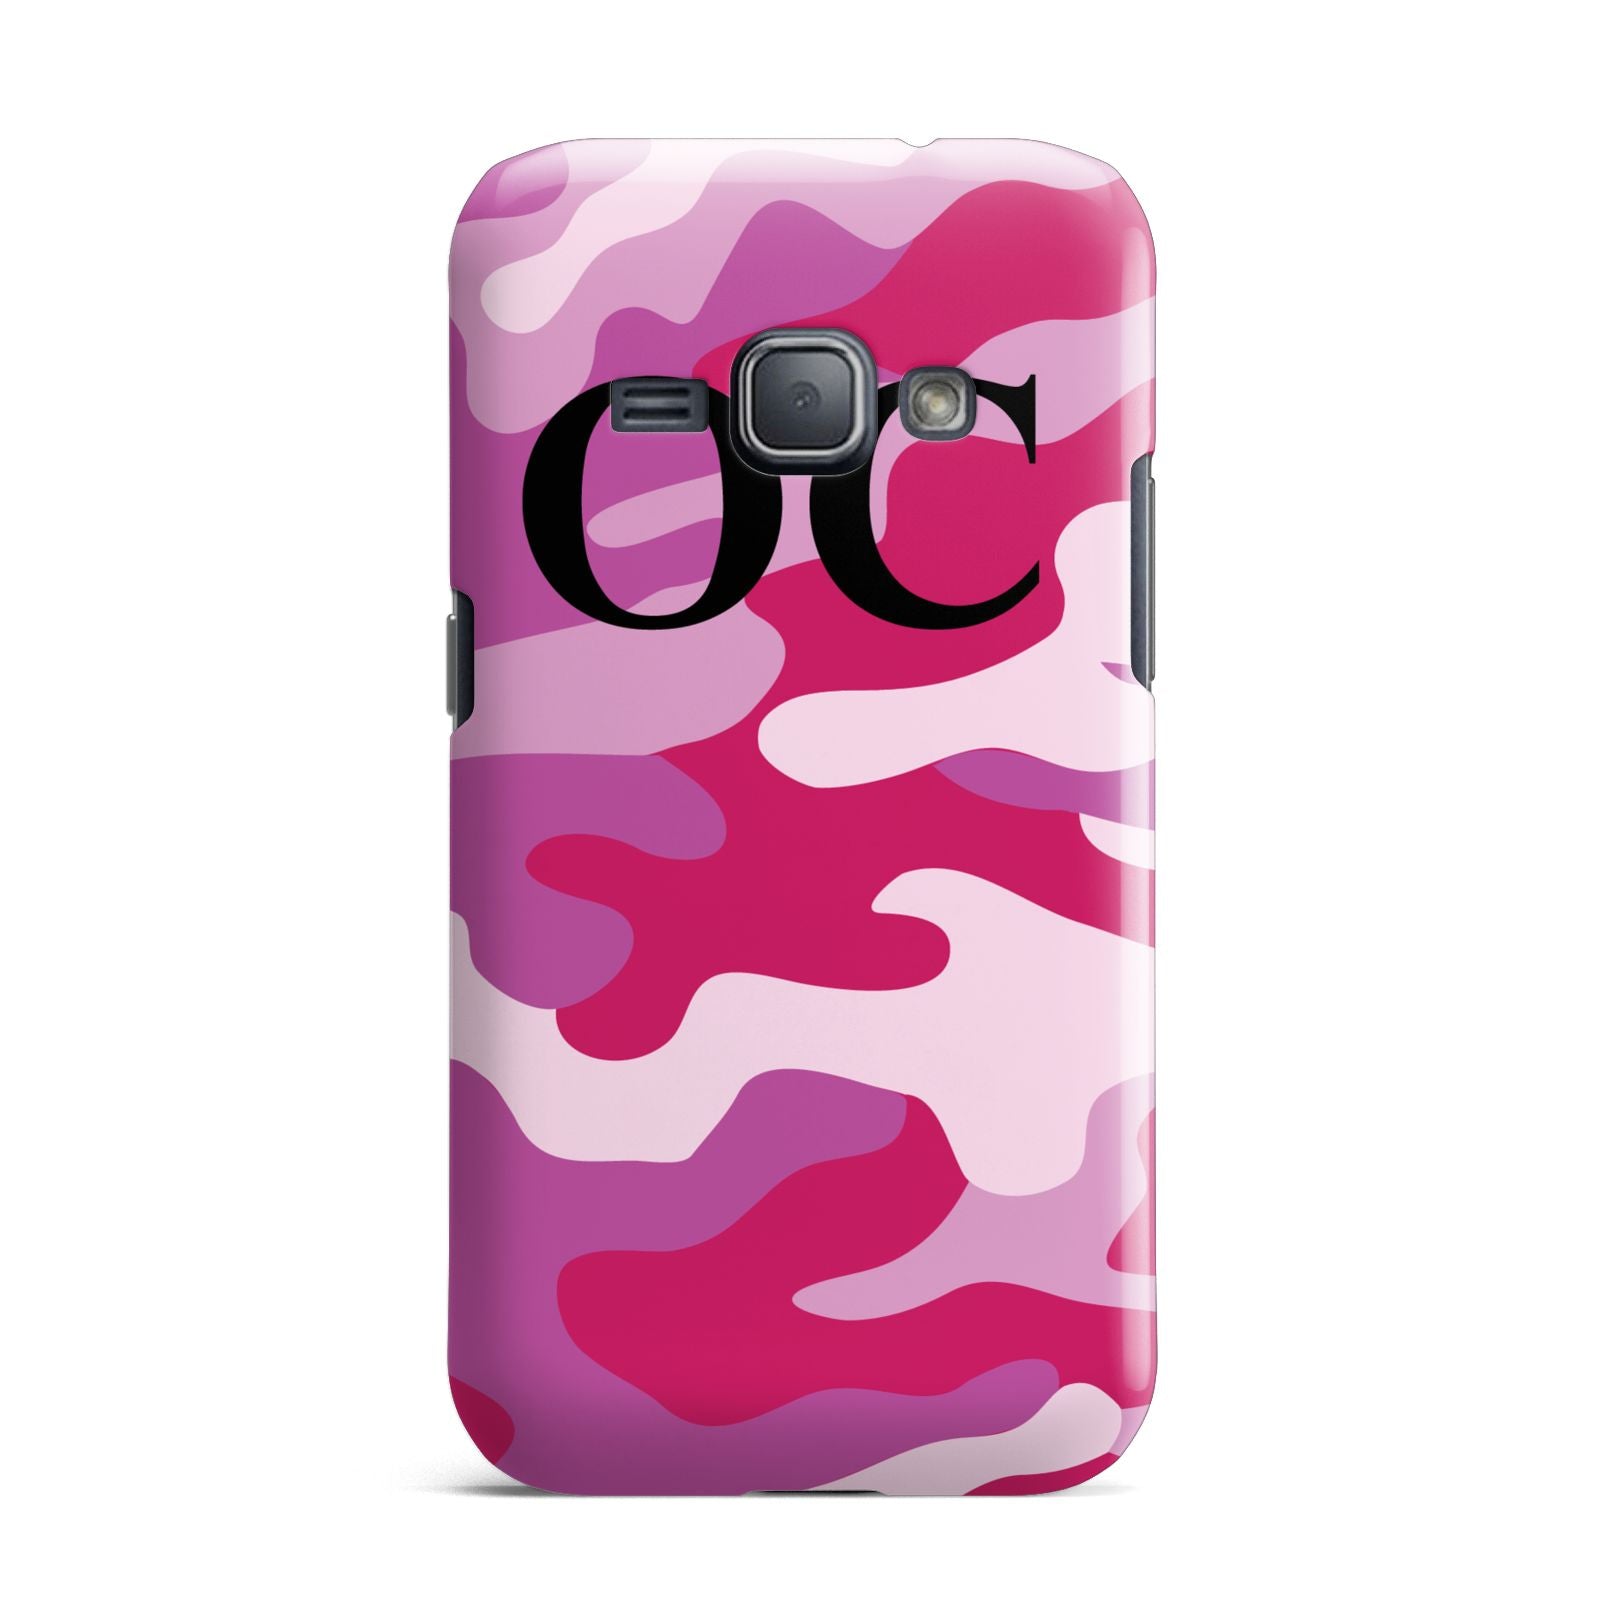 Camouflage Personalised Samsung Galaxy J1 2016 Case